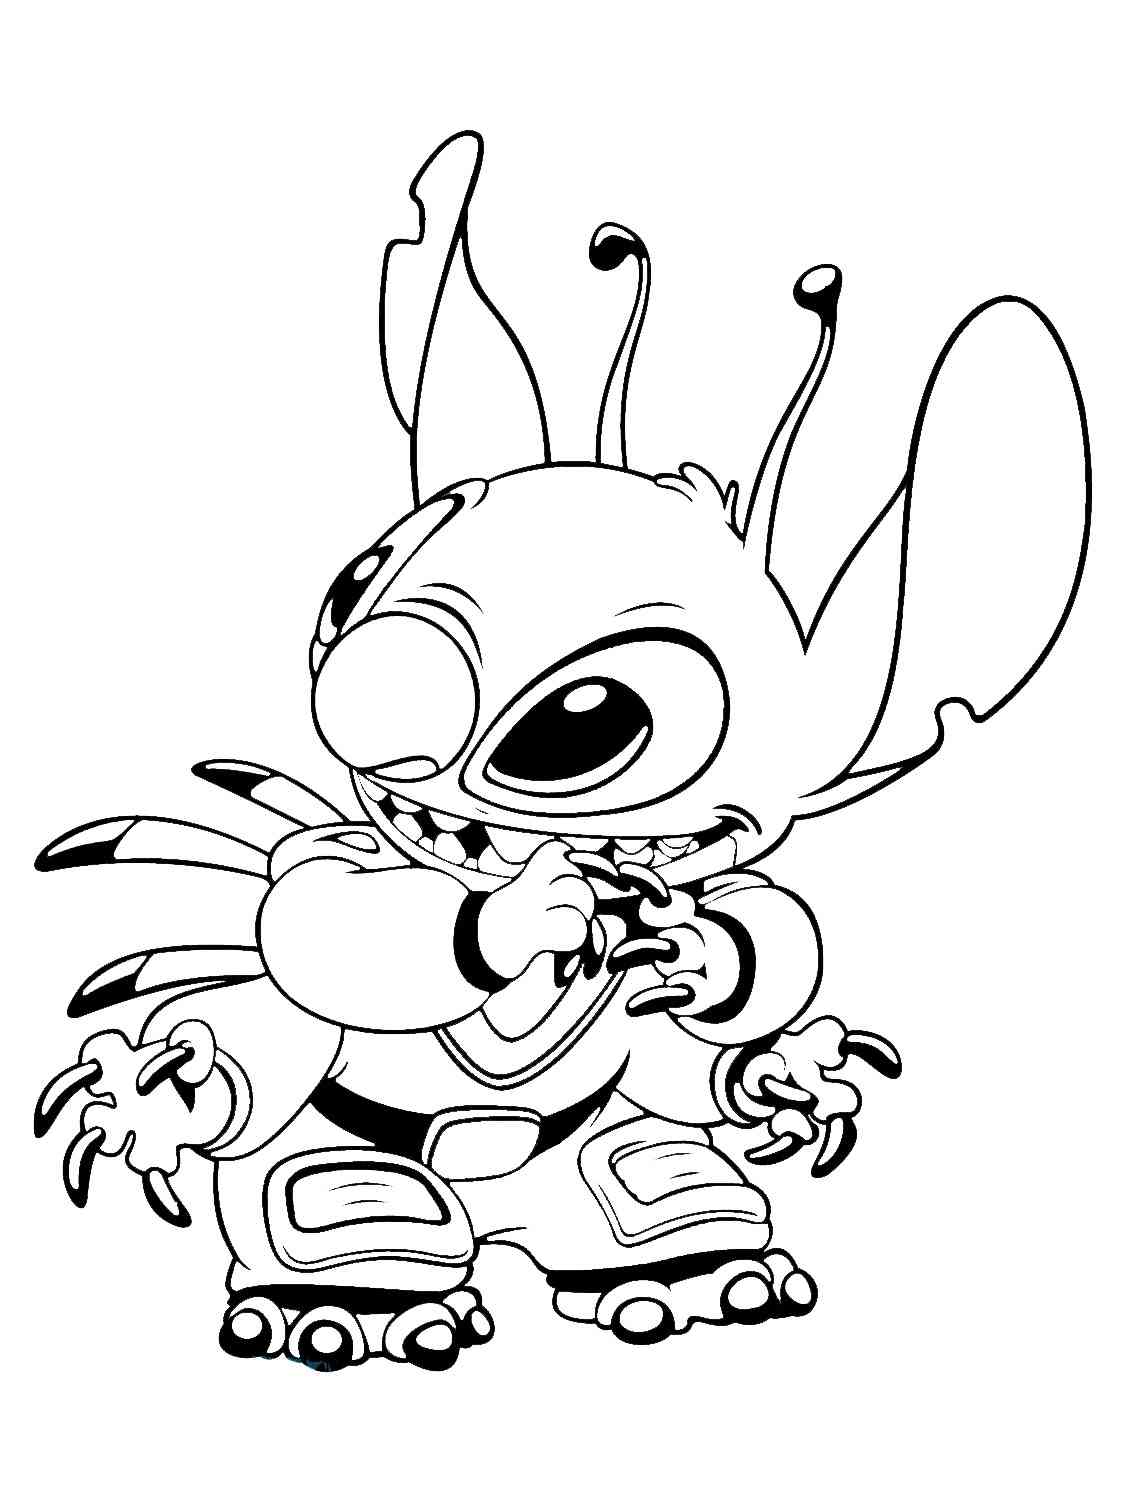 Lilo and Stitch coloring pages. Download and print Lilo and Stitch ...